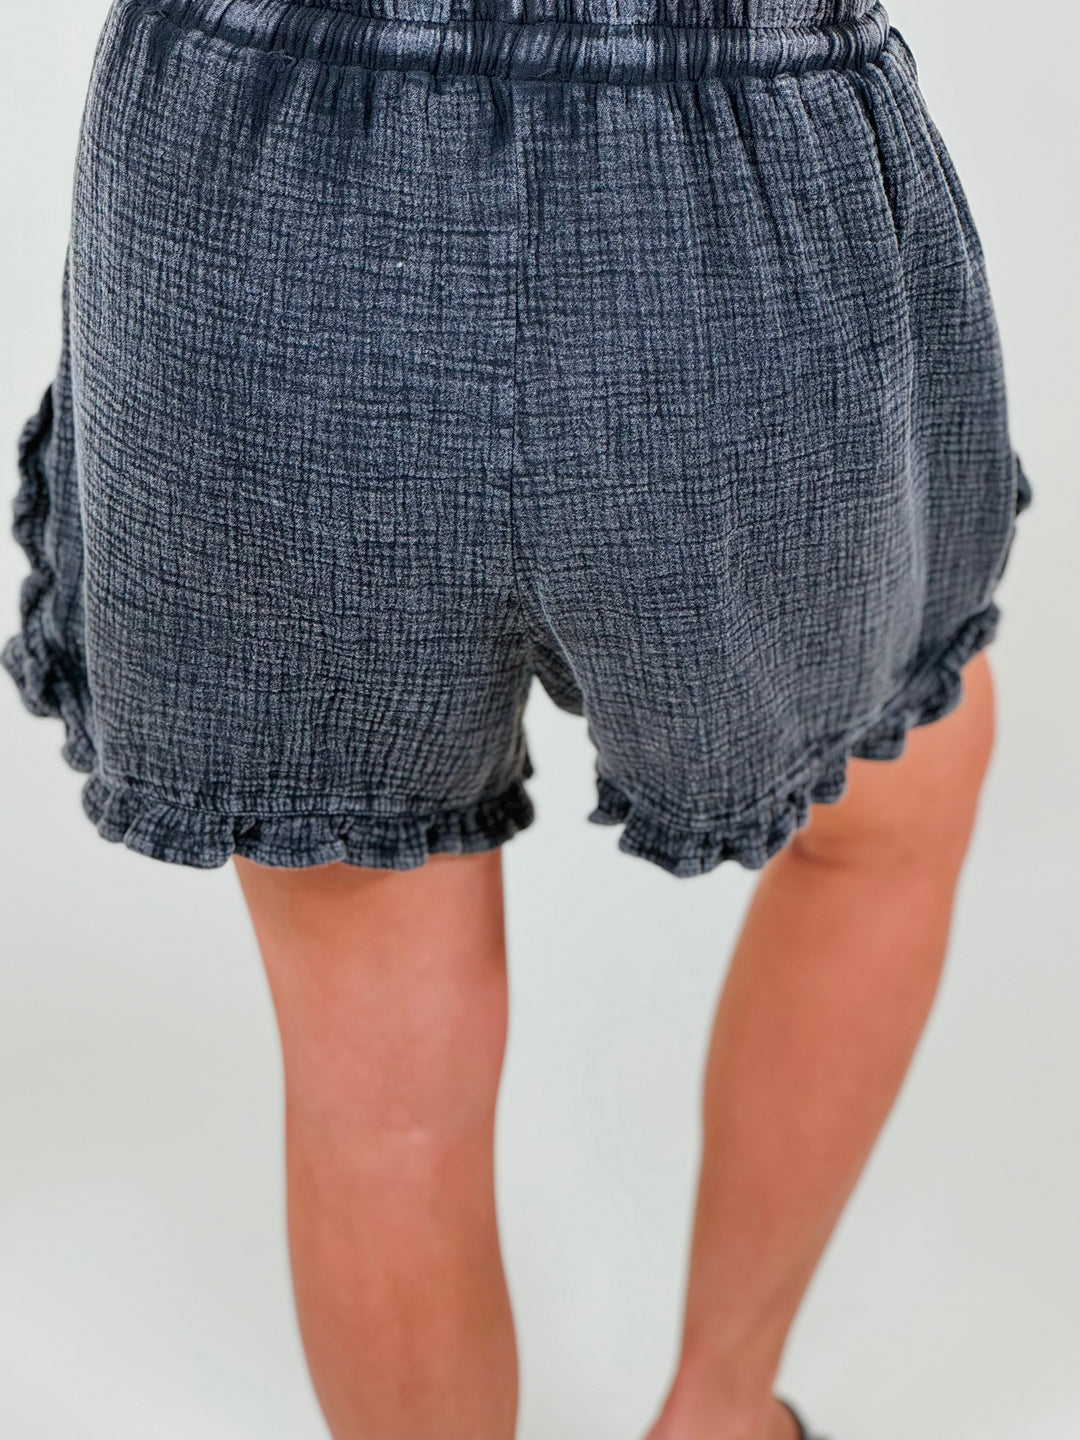 Mineral Washed Cotton Gauze Shorts - 2 Color Options - Available Small Through Large